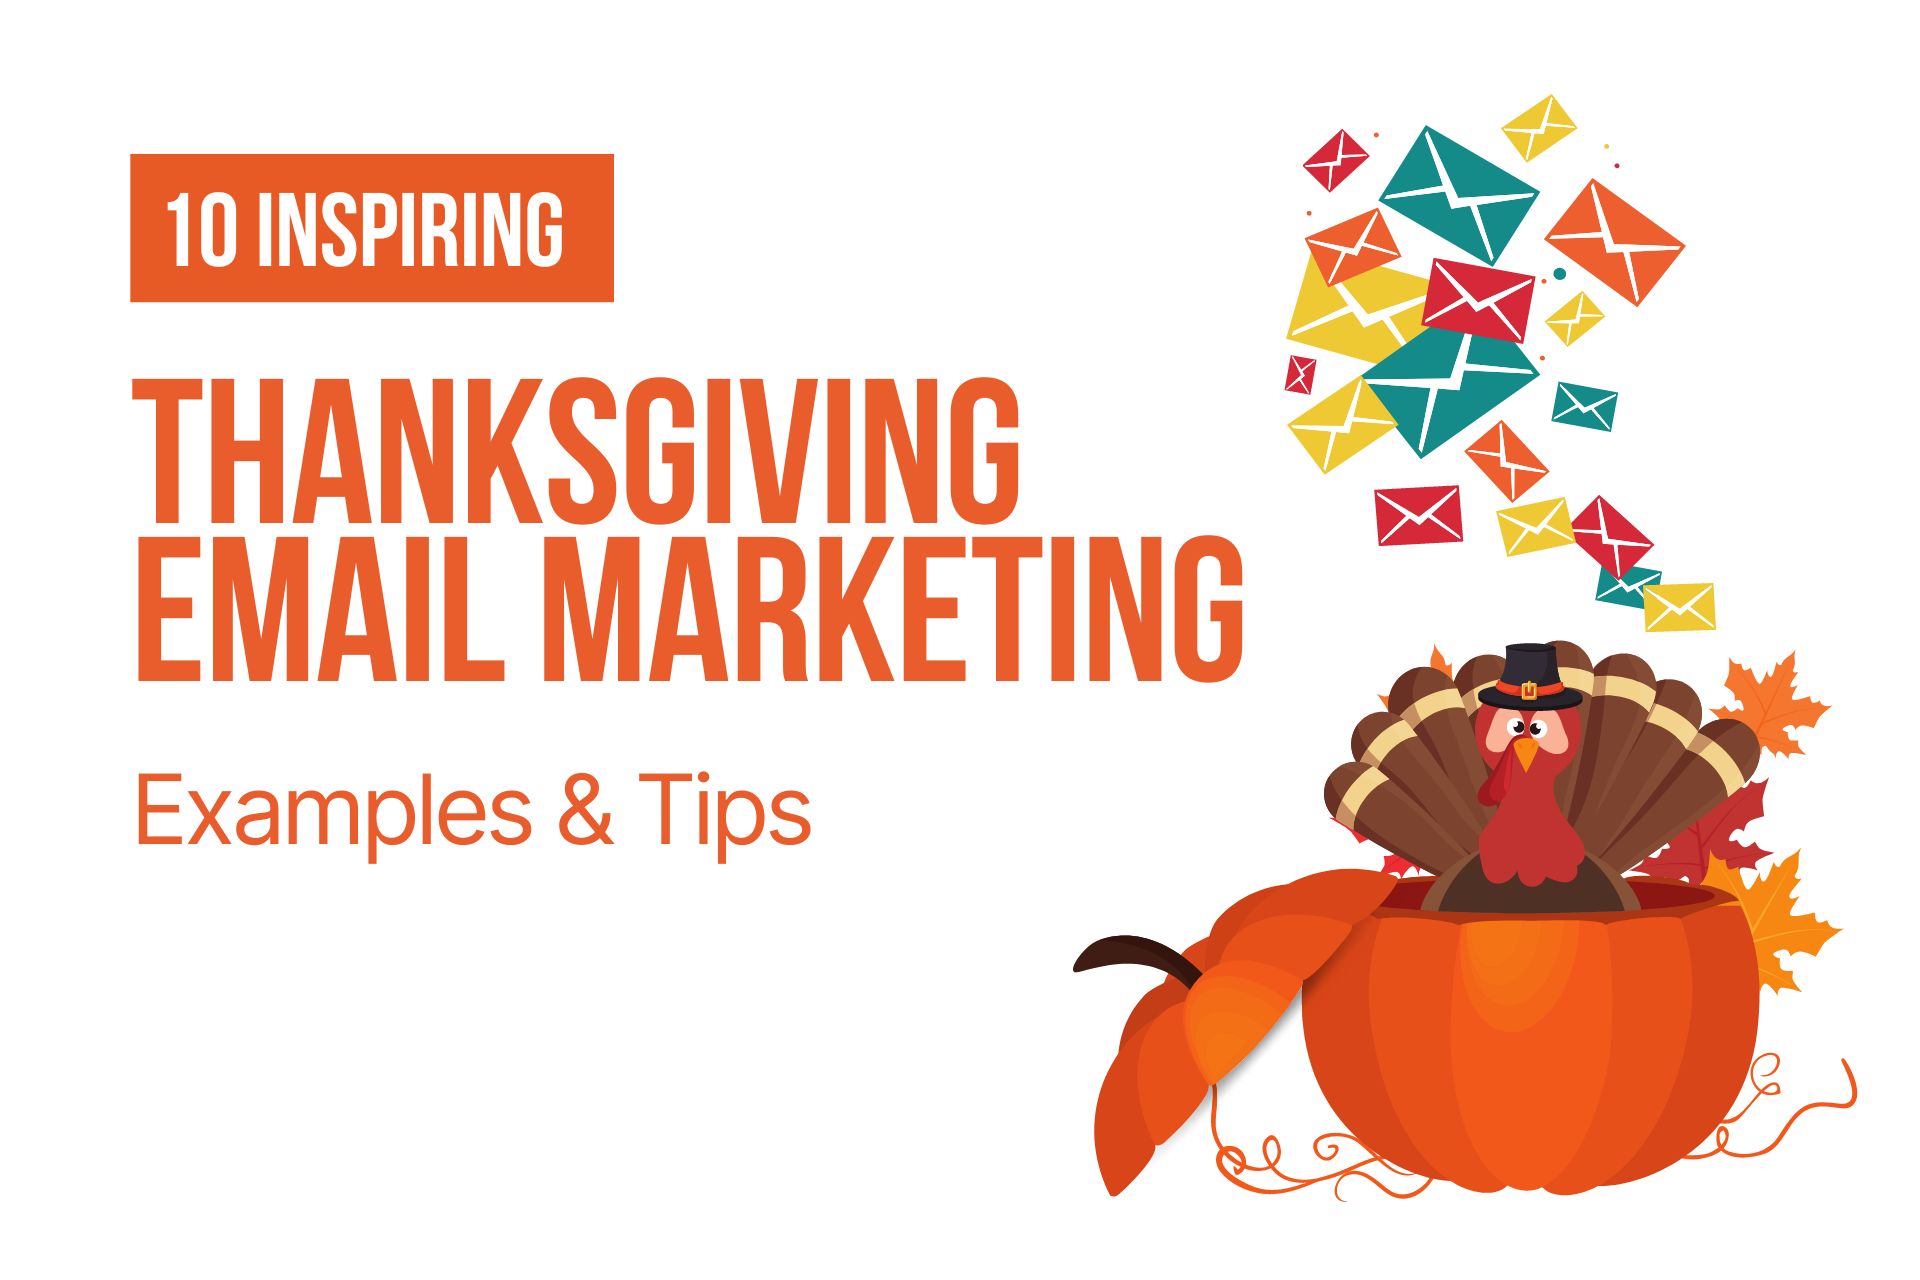 10 Inspiring Thanksgiving Email Marketing Examples (+Tips)